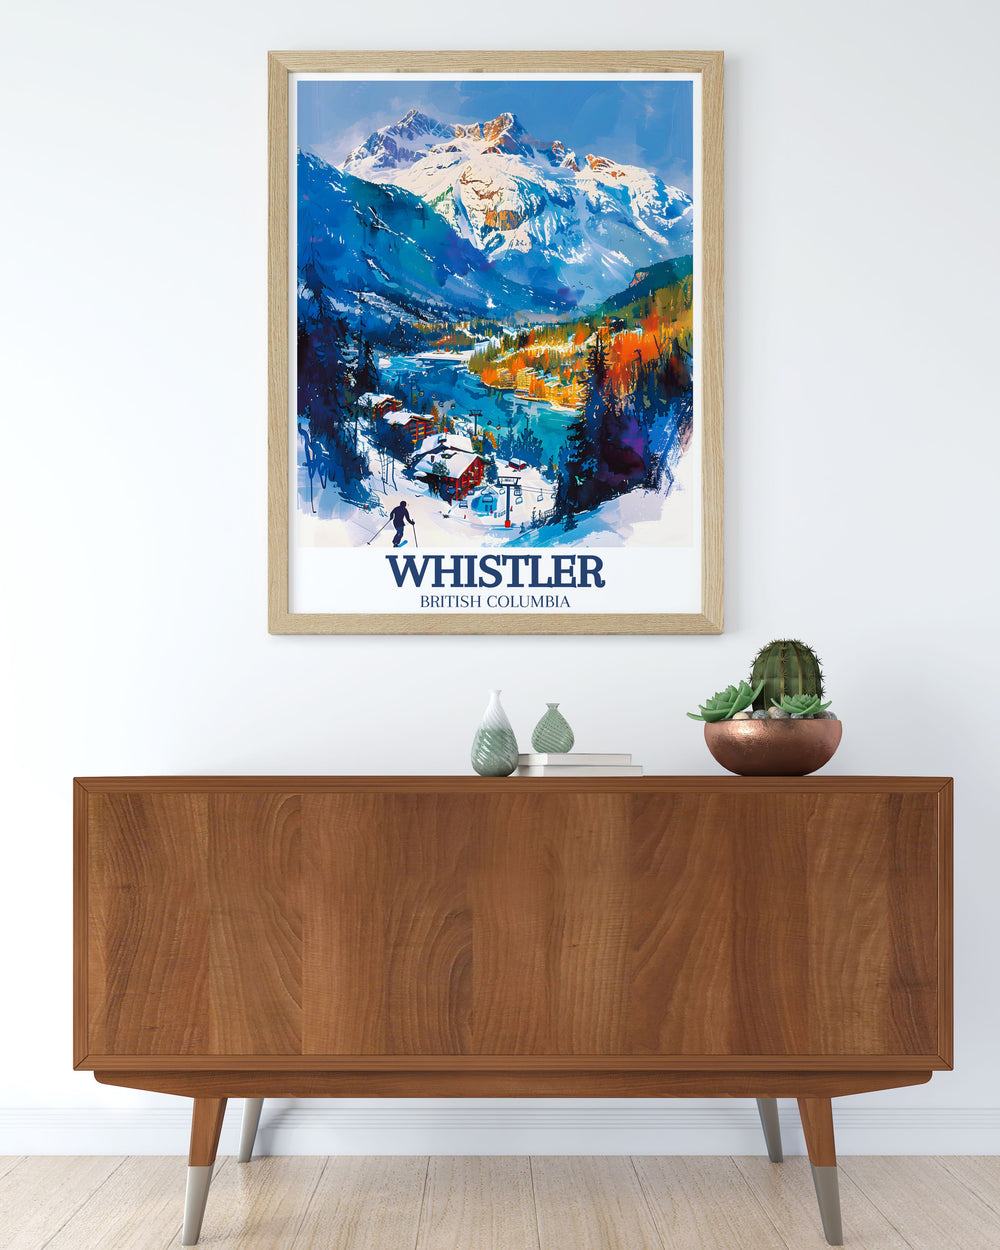 Whistler art print capturing the iconic alpine scenery of the Coast Mountains ideal for ski enthusiasts and nature lovers looking to enhance their wall art collection